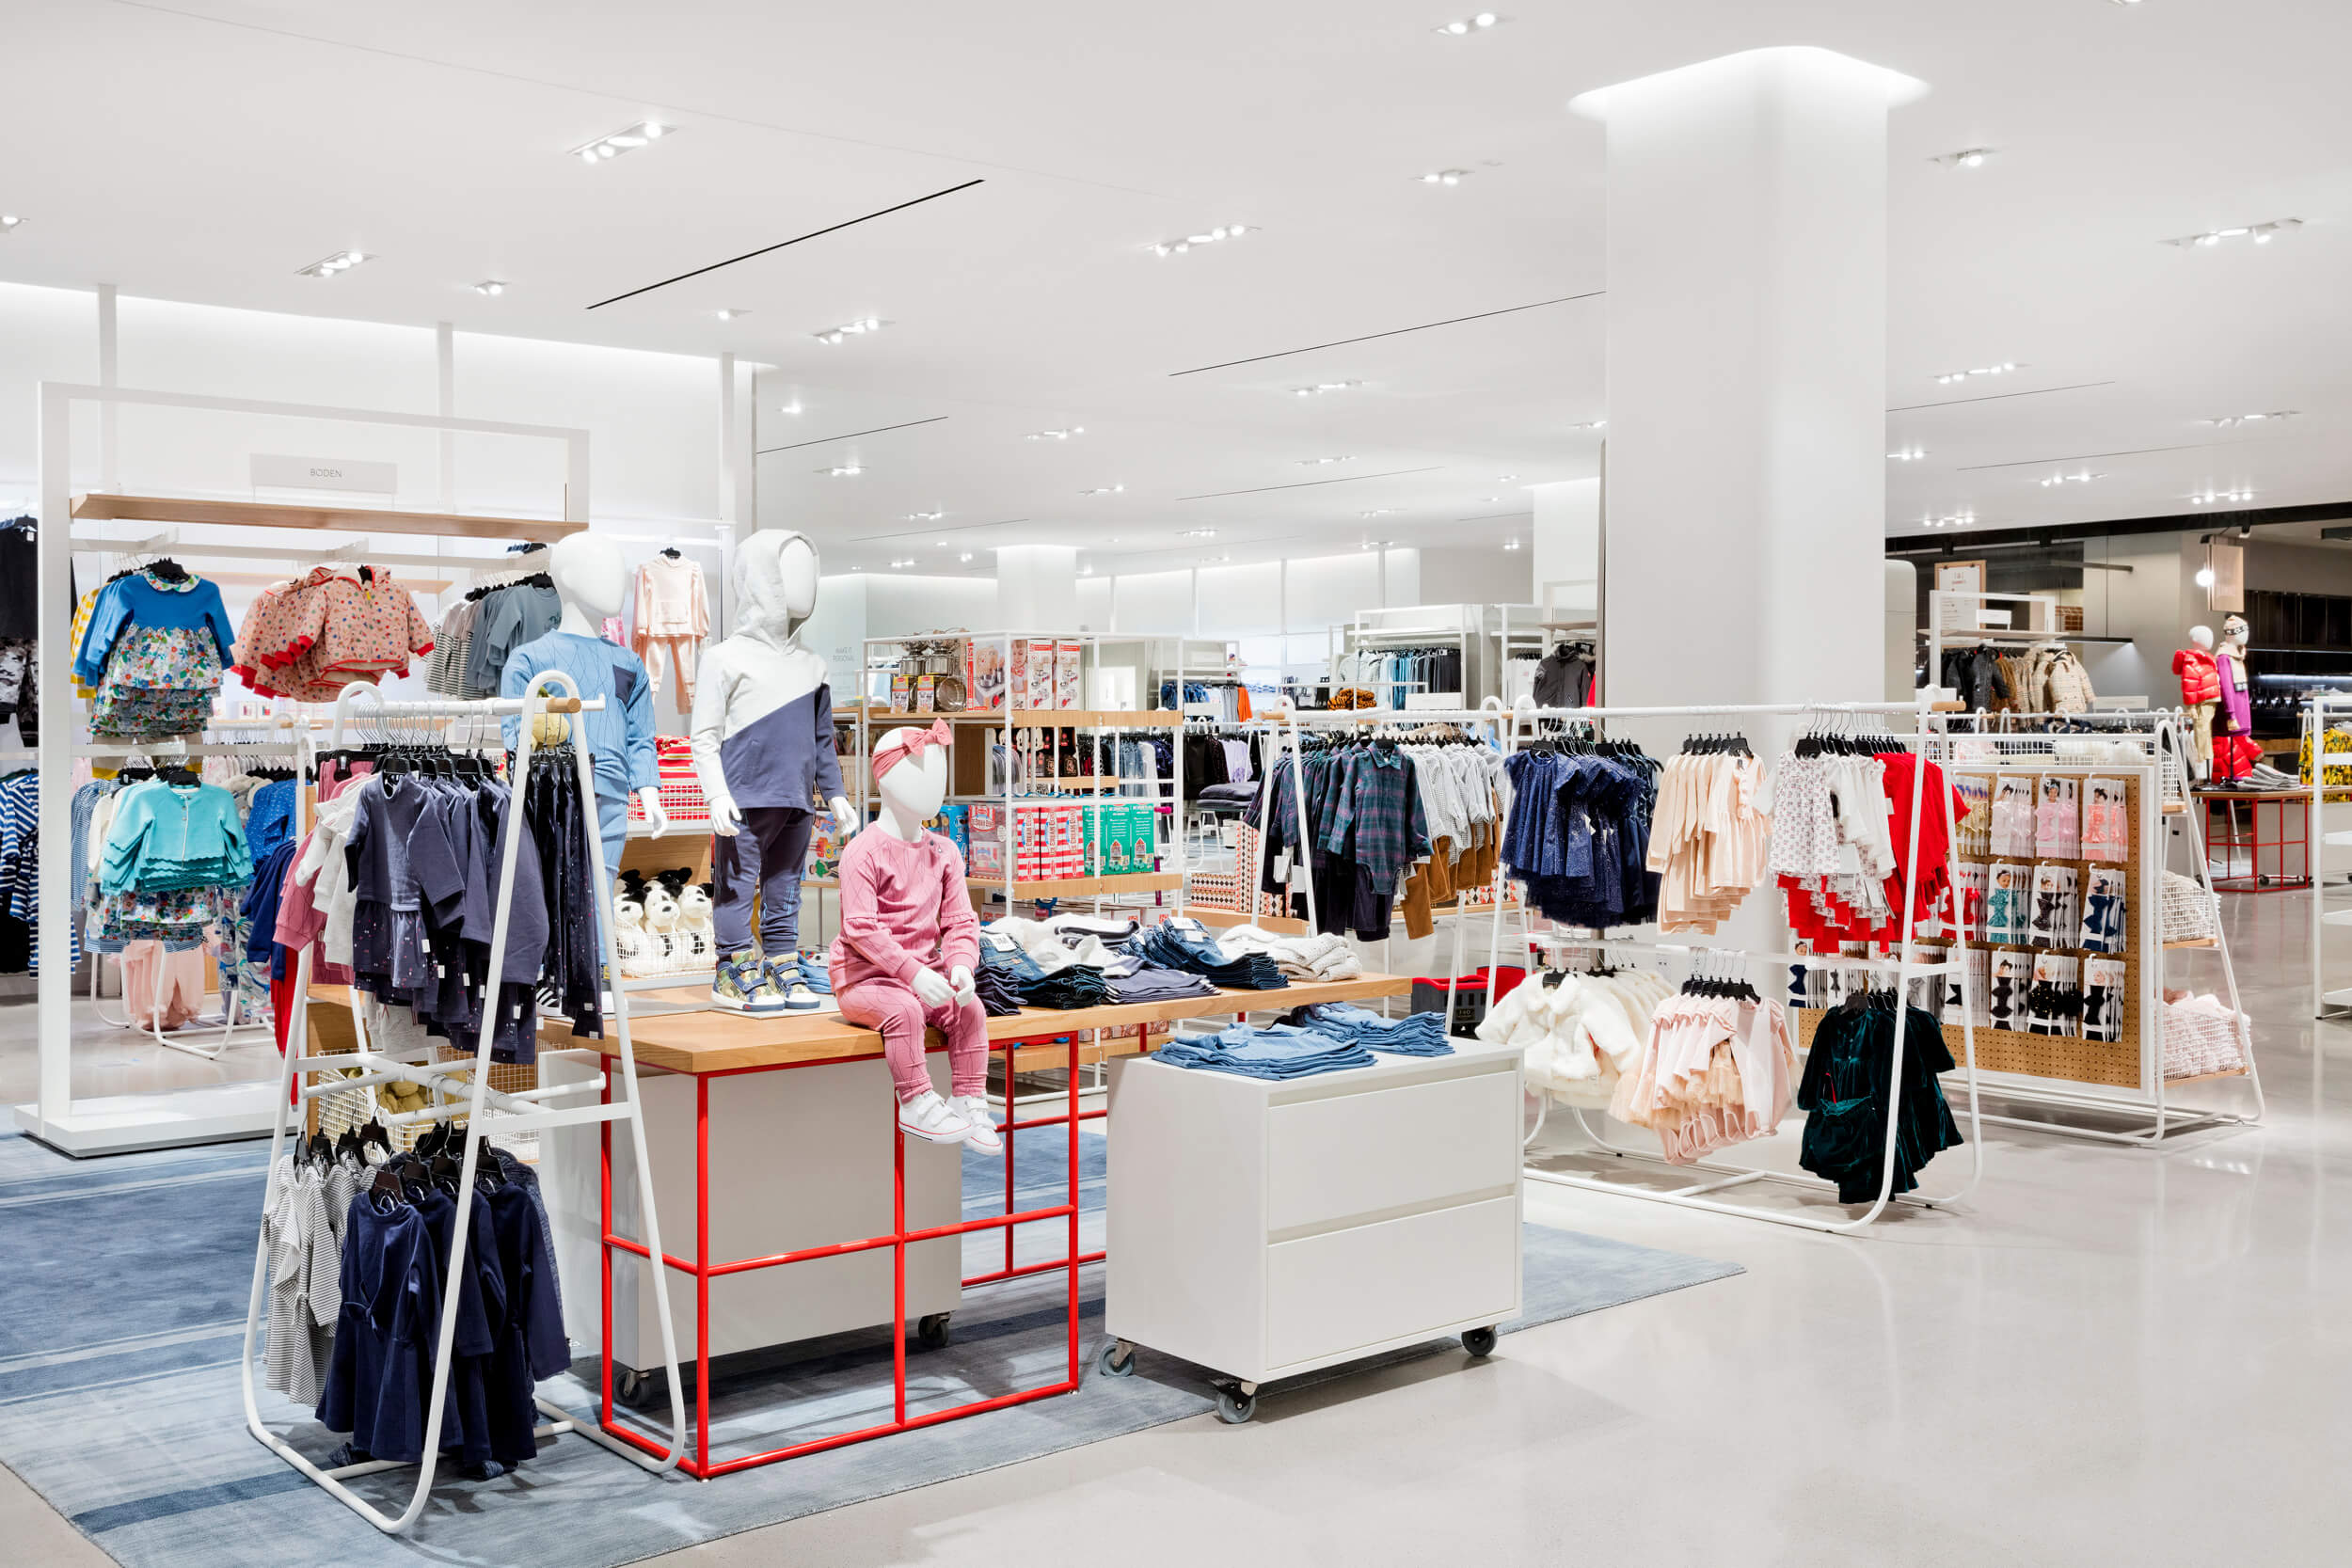 Nordstrom Opens First-Ever Flagship Store In NYC